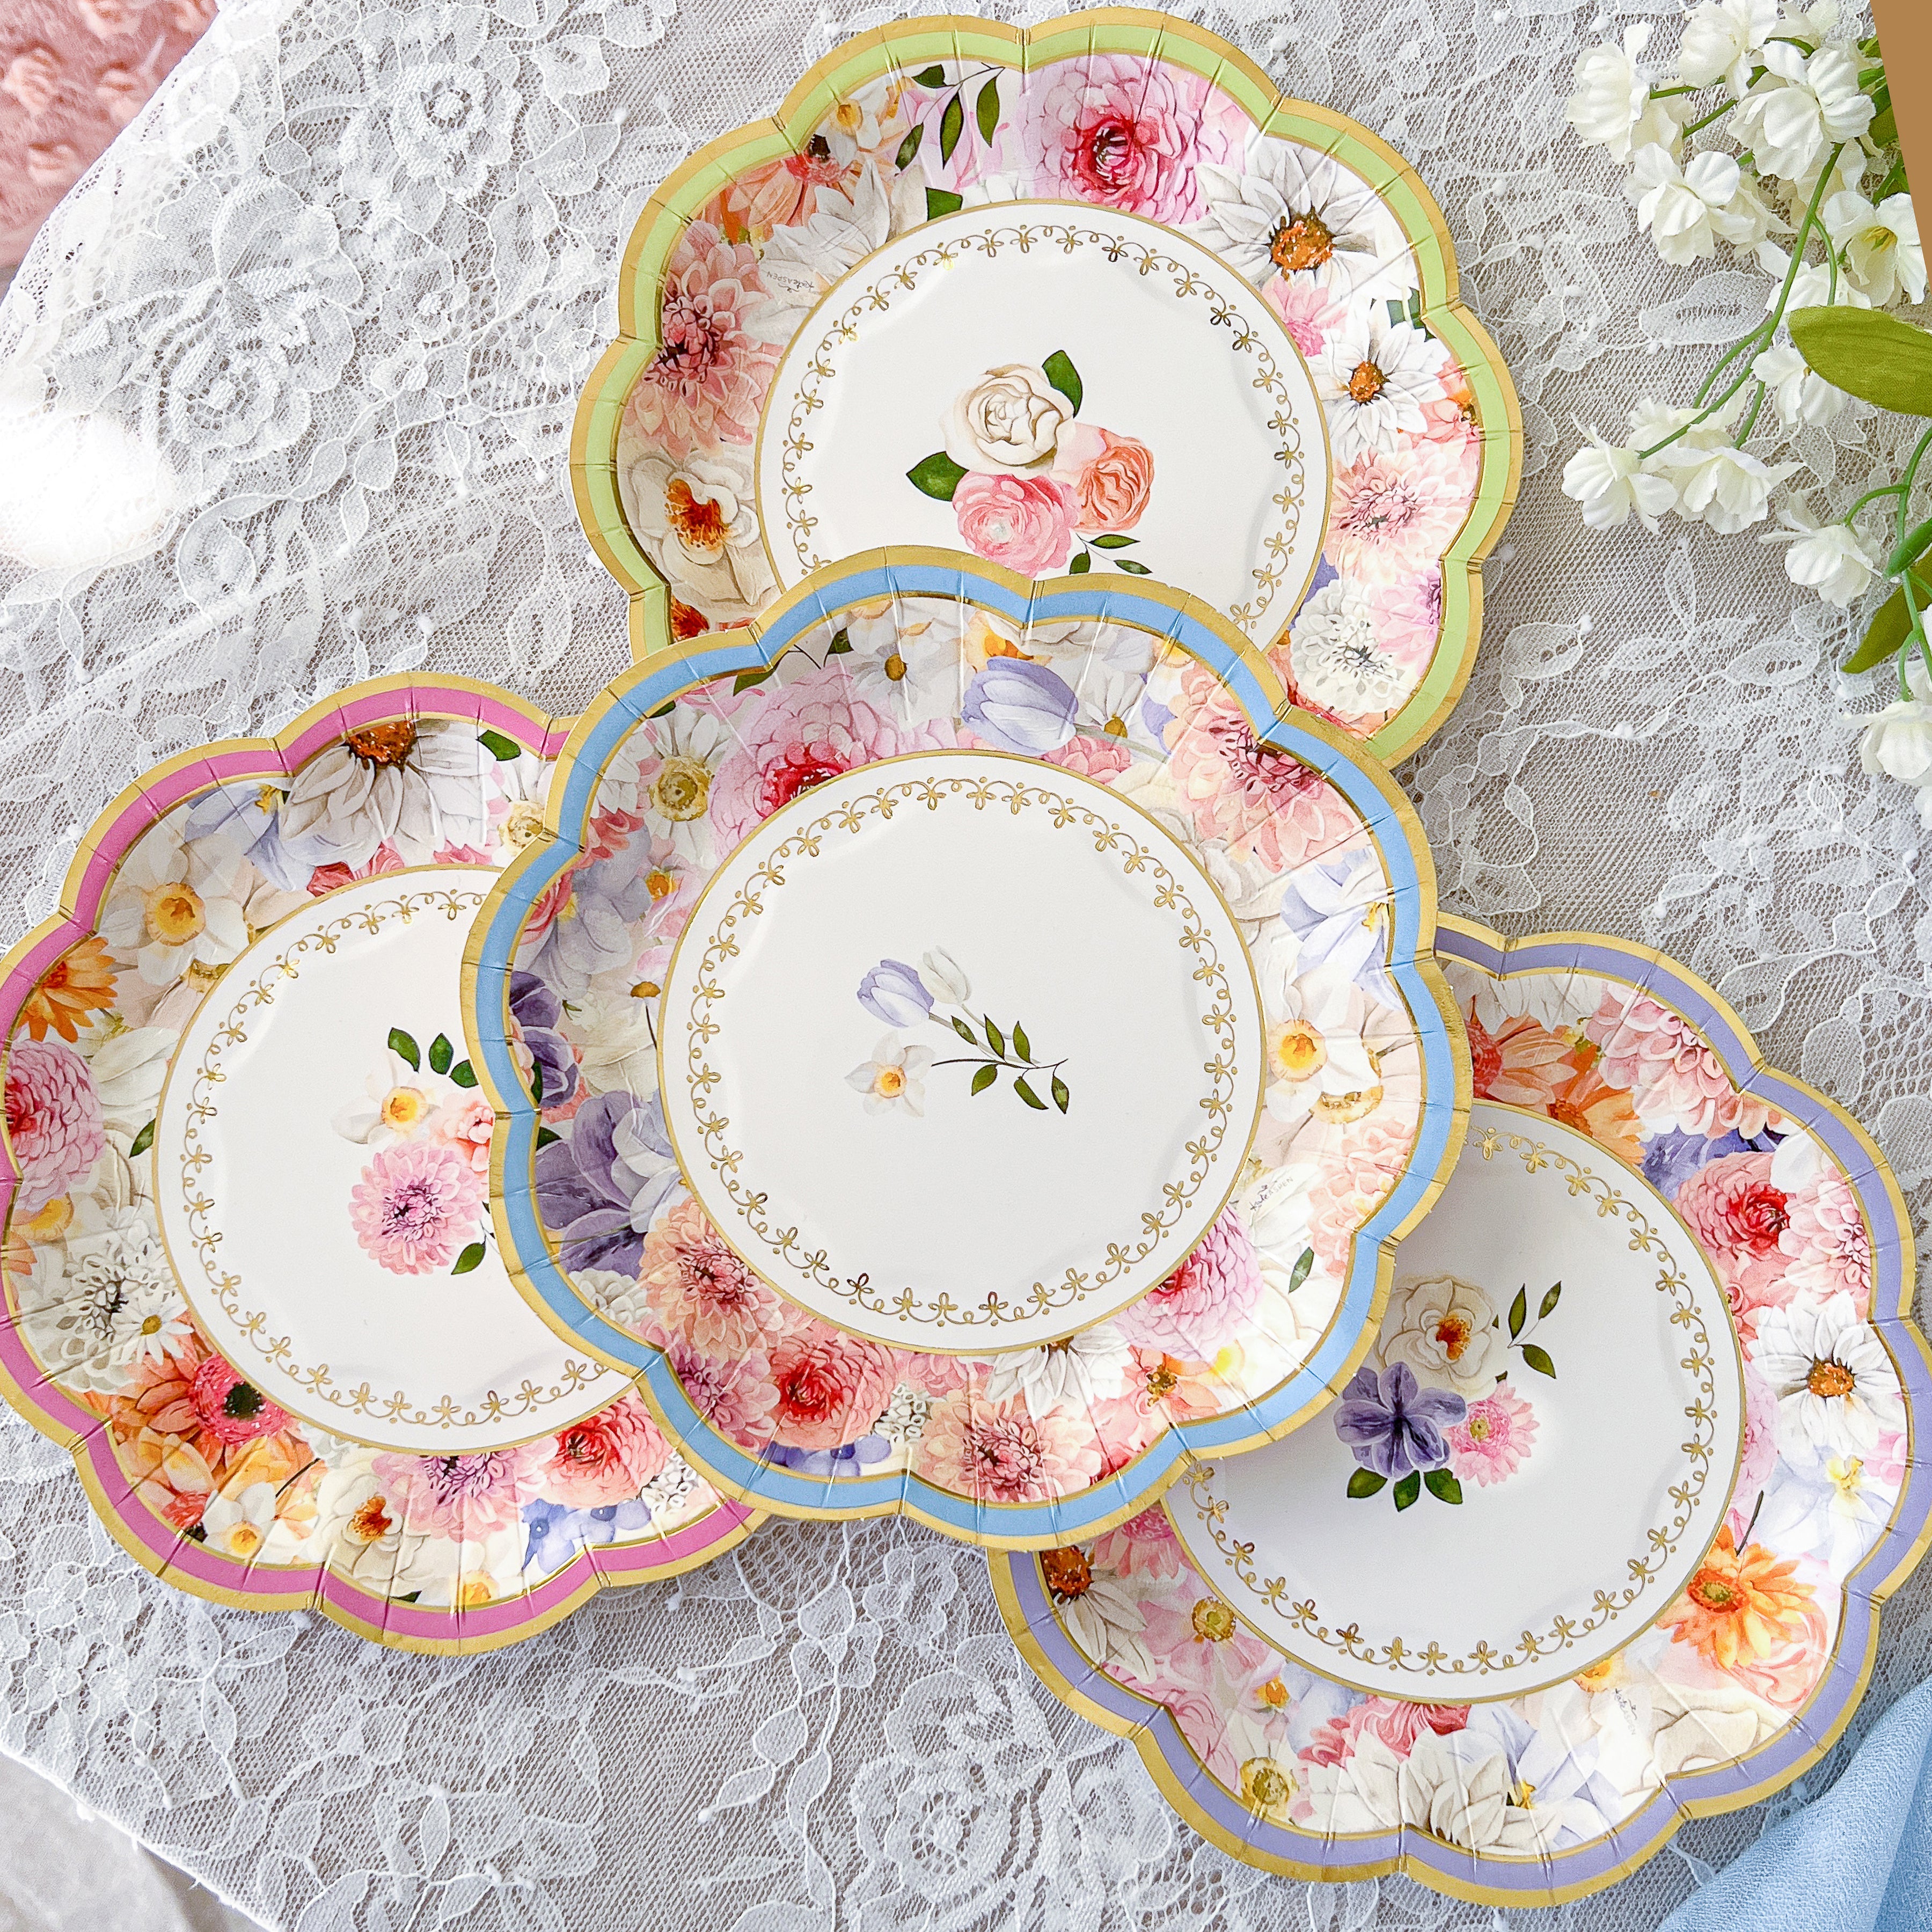 Tea Time Party 9 Premium Paper Plates - Assorted (Set of 16)